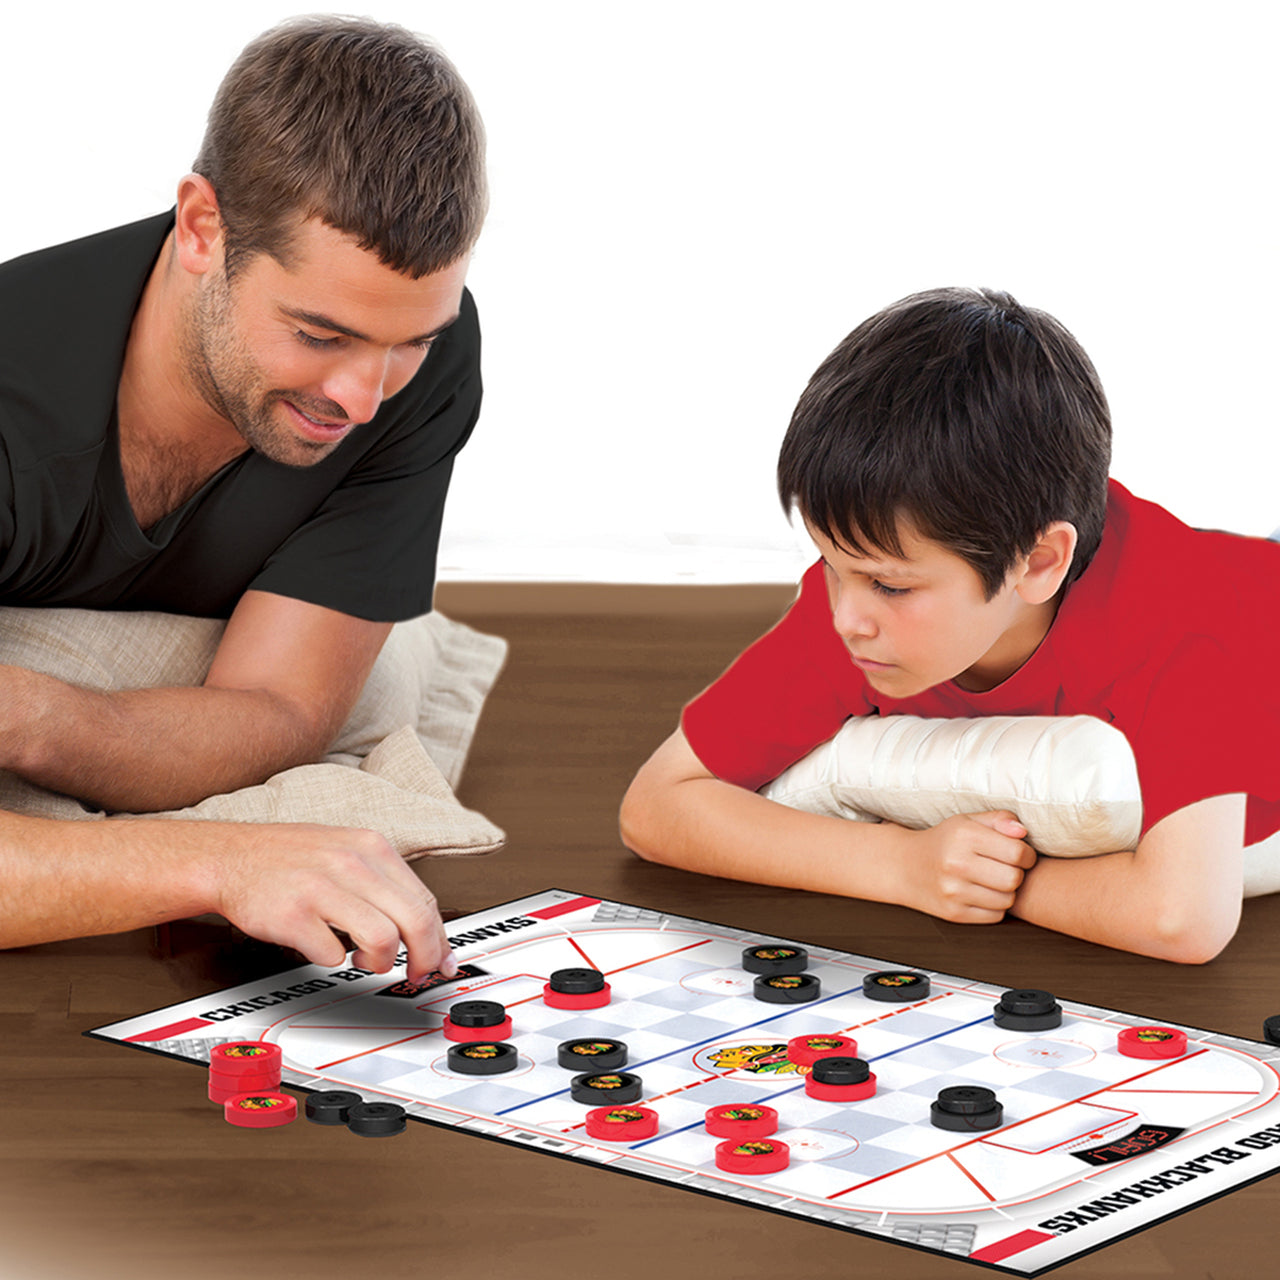 Chicago Blackhawks Checkers Board Game by Masterpieces